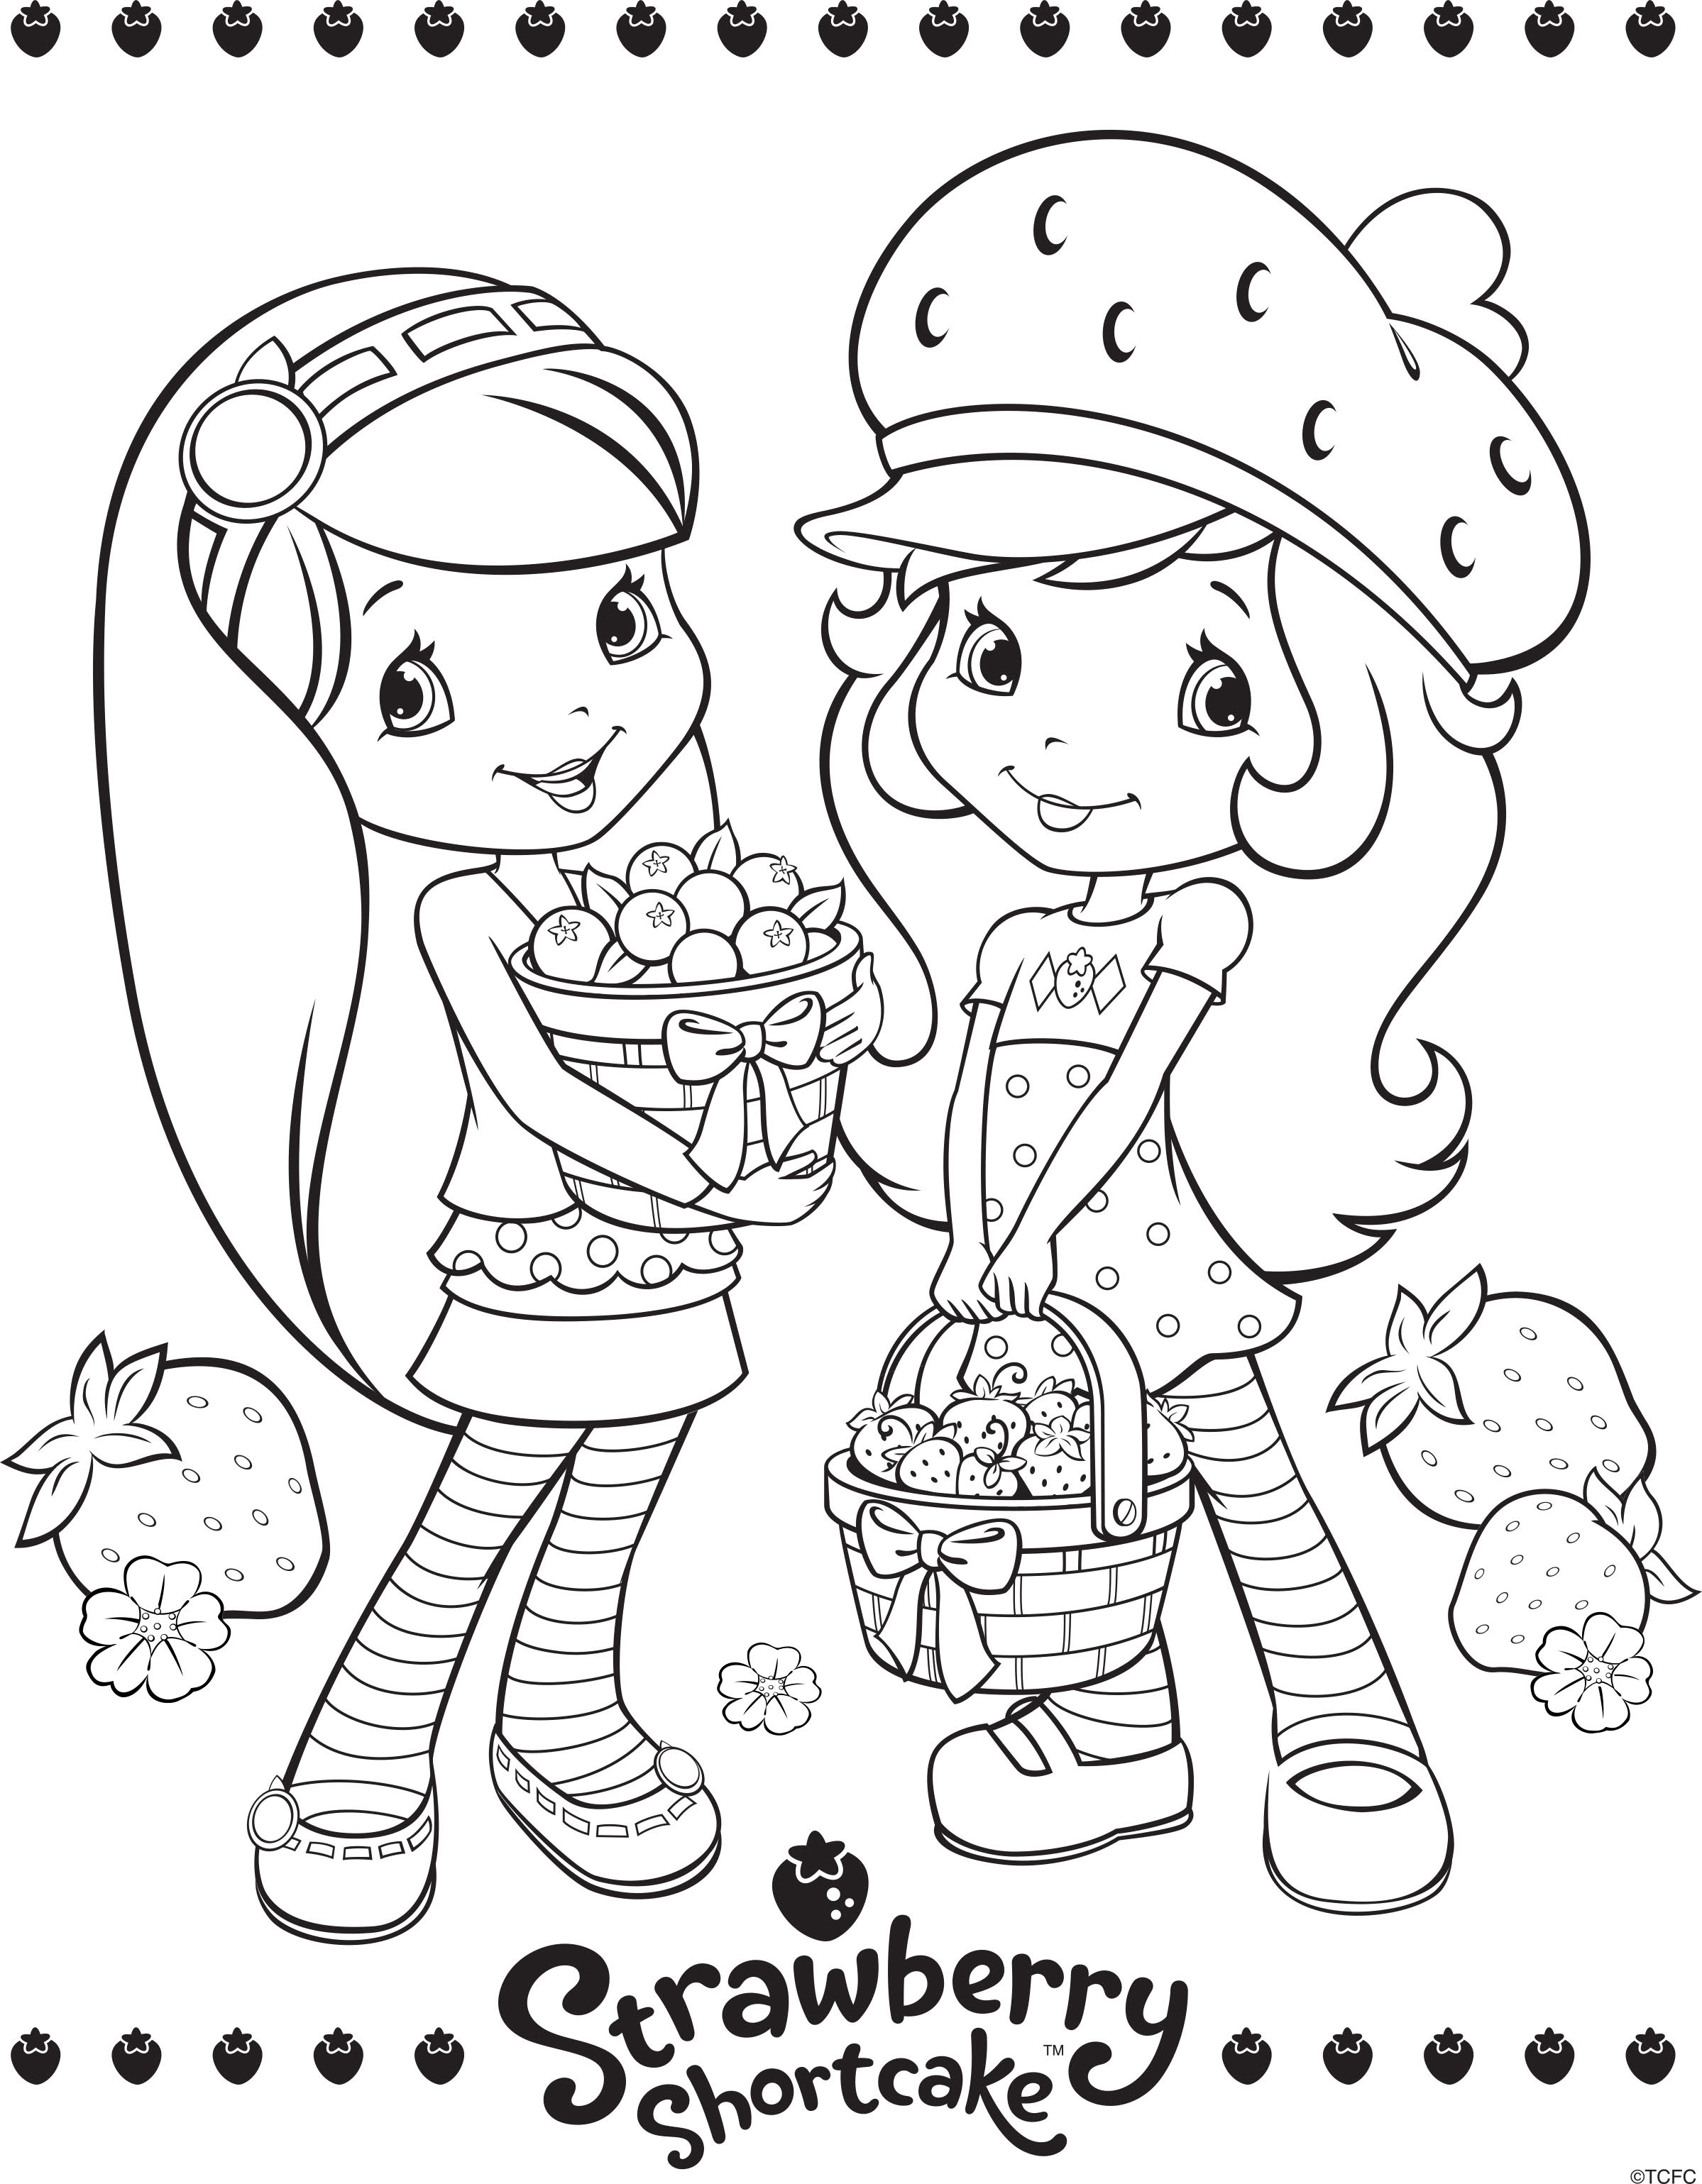 Strawberry shortcake berrykins coloring pages